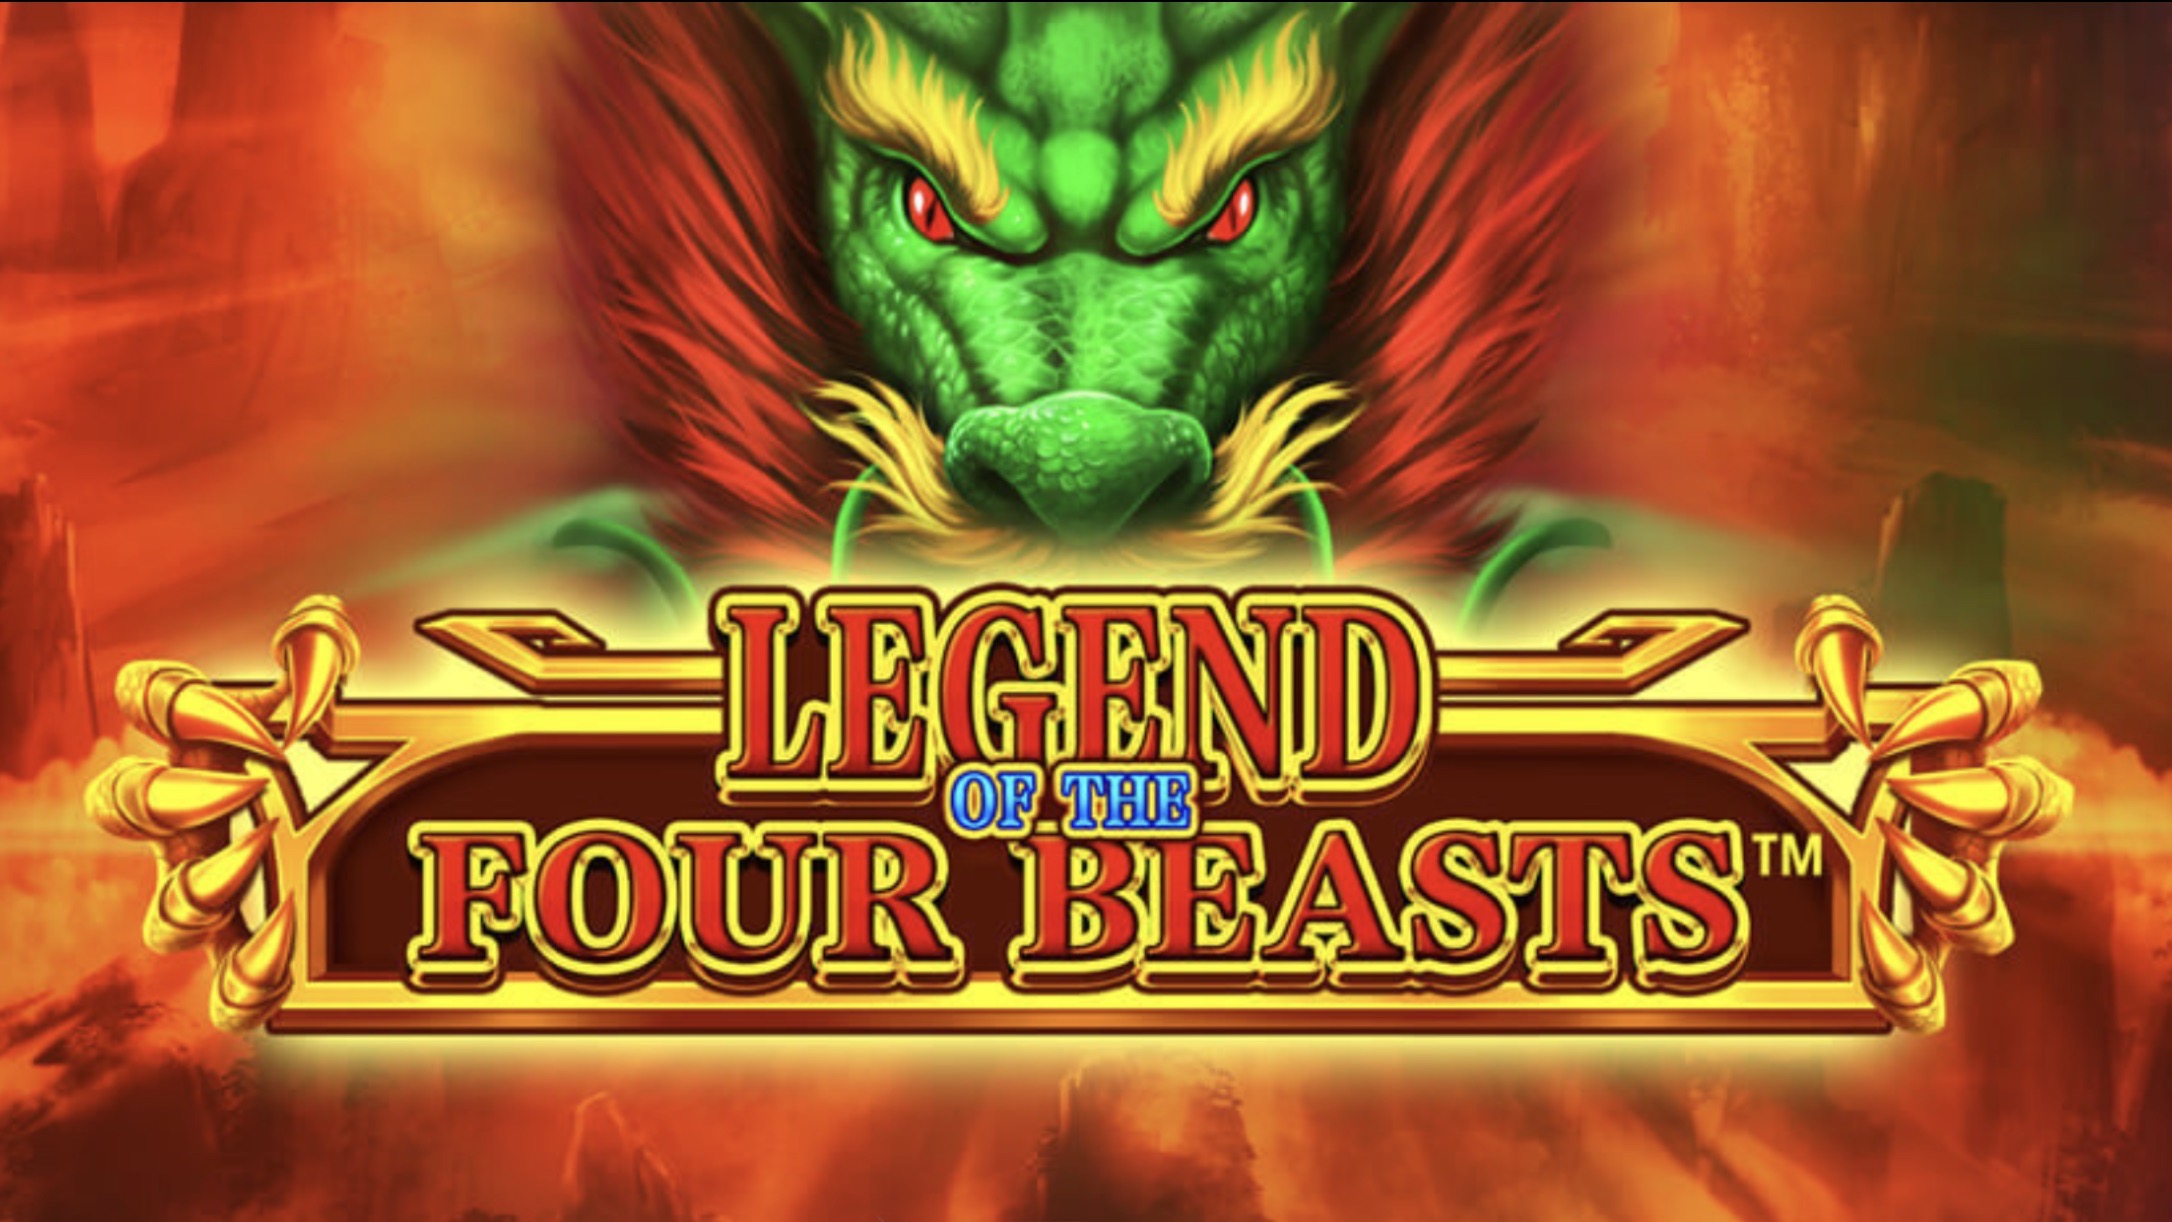 Legend of the Four Beasts is a 5x3, 243-payline video slot with features such as multiple types of wilds and an Ultra Bet feature.